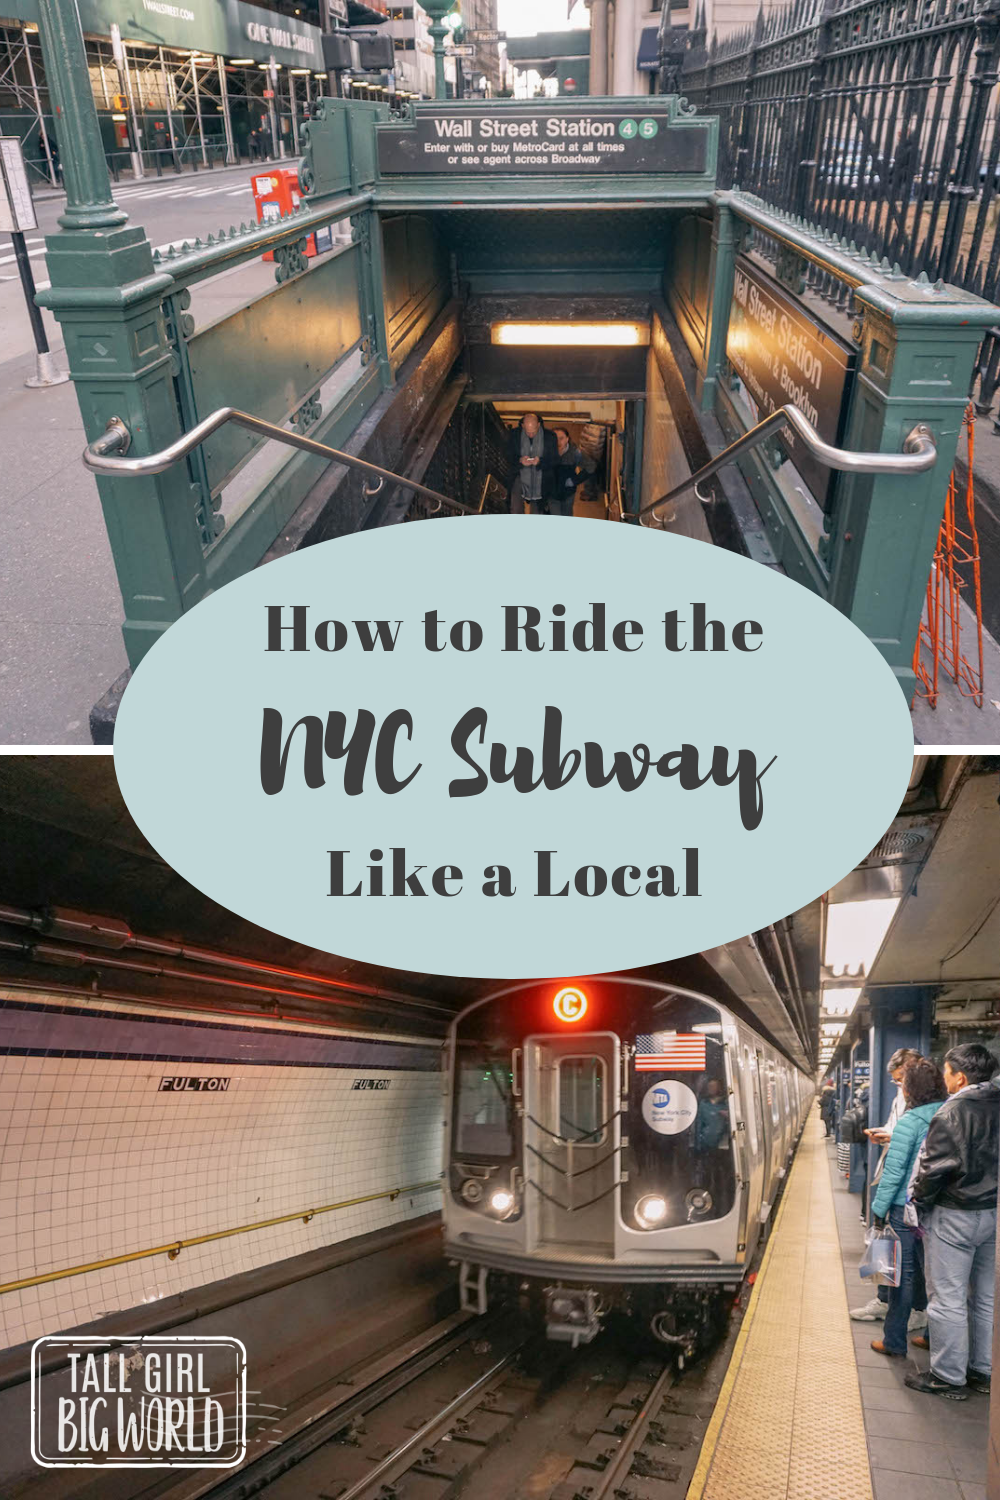 Never ridden the subway before? Here's how to ride the NYC subway like a local, including where to sit and things to watch out for. #NYC #NewYork #NewYorkNewYork #NewYorkCity #EastCoast #TravelTips #Travel #USA #USTravel